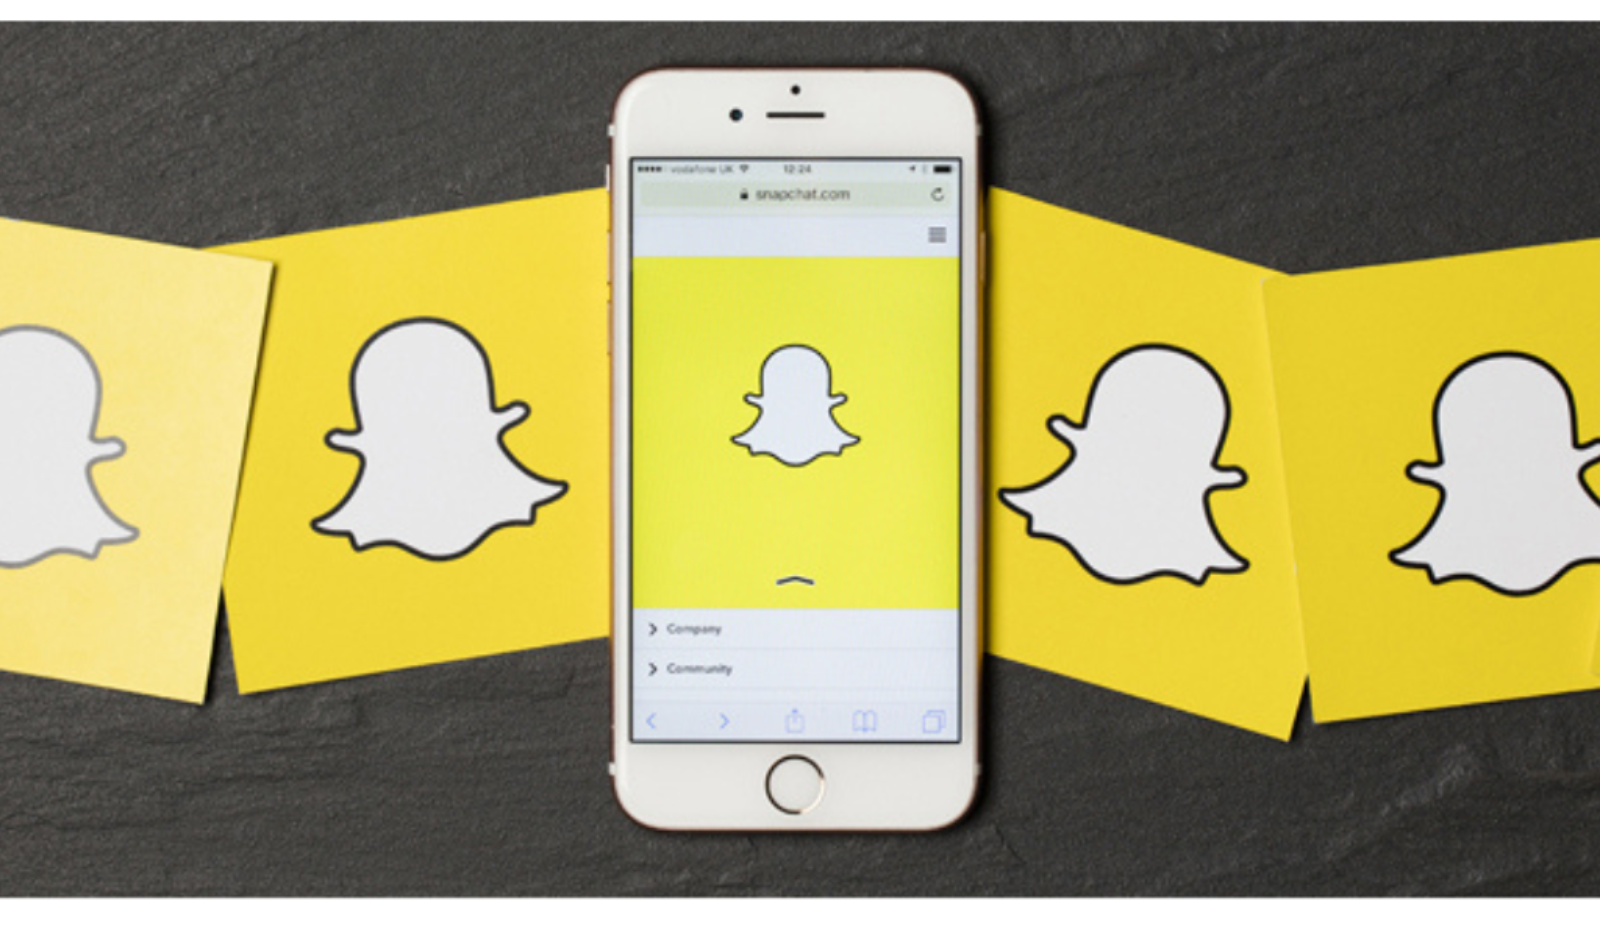 Snapchat Advertising: New Multi-format Ad Delivery To Increase Reach